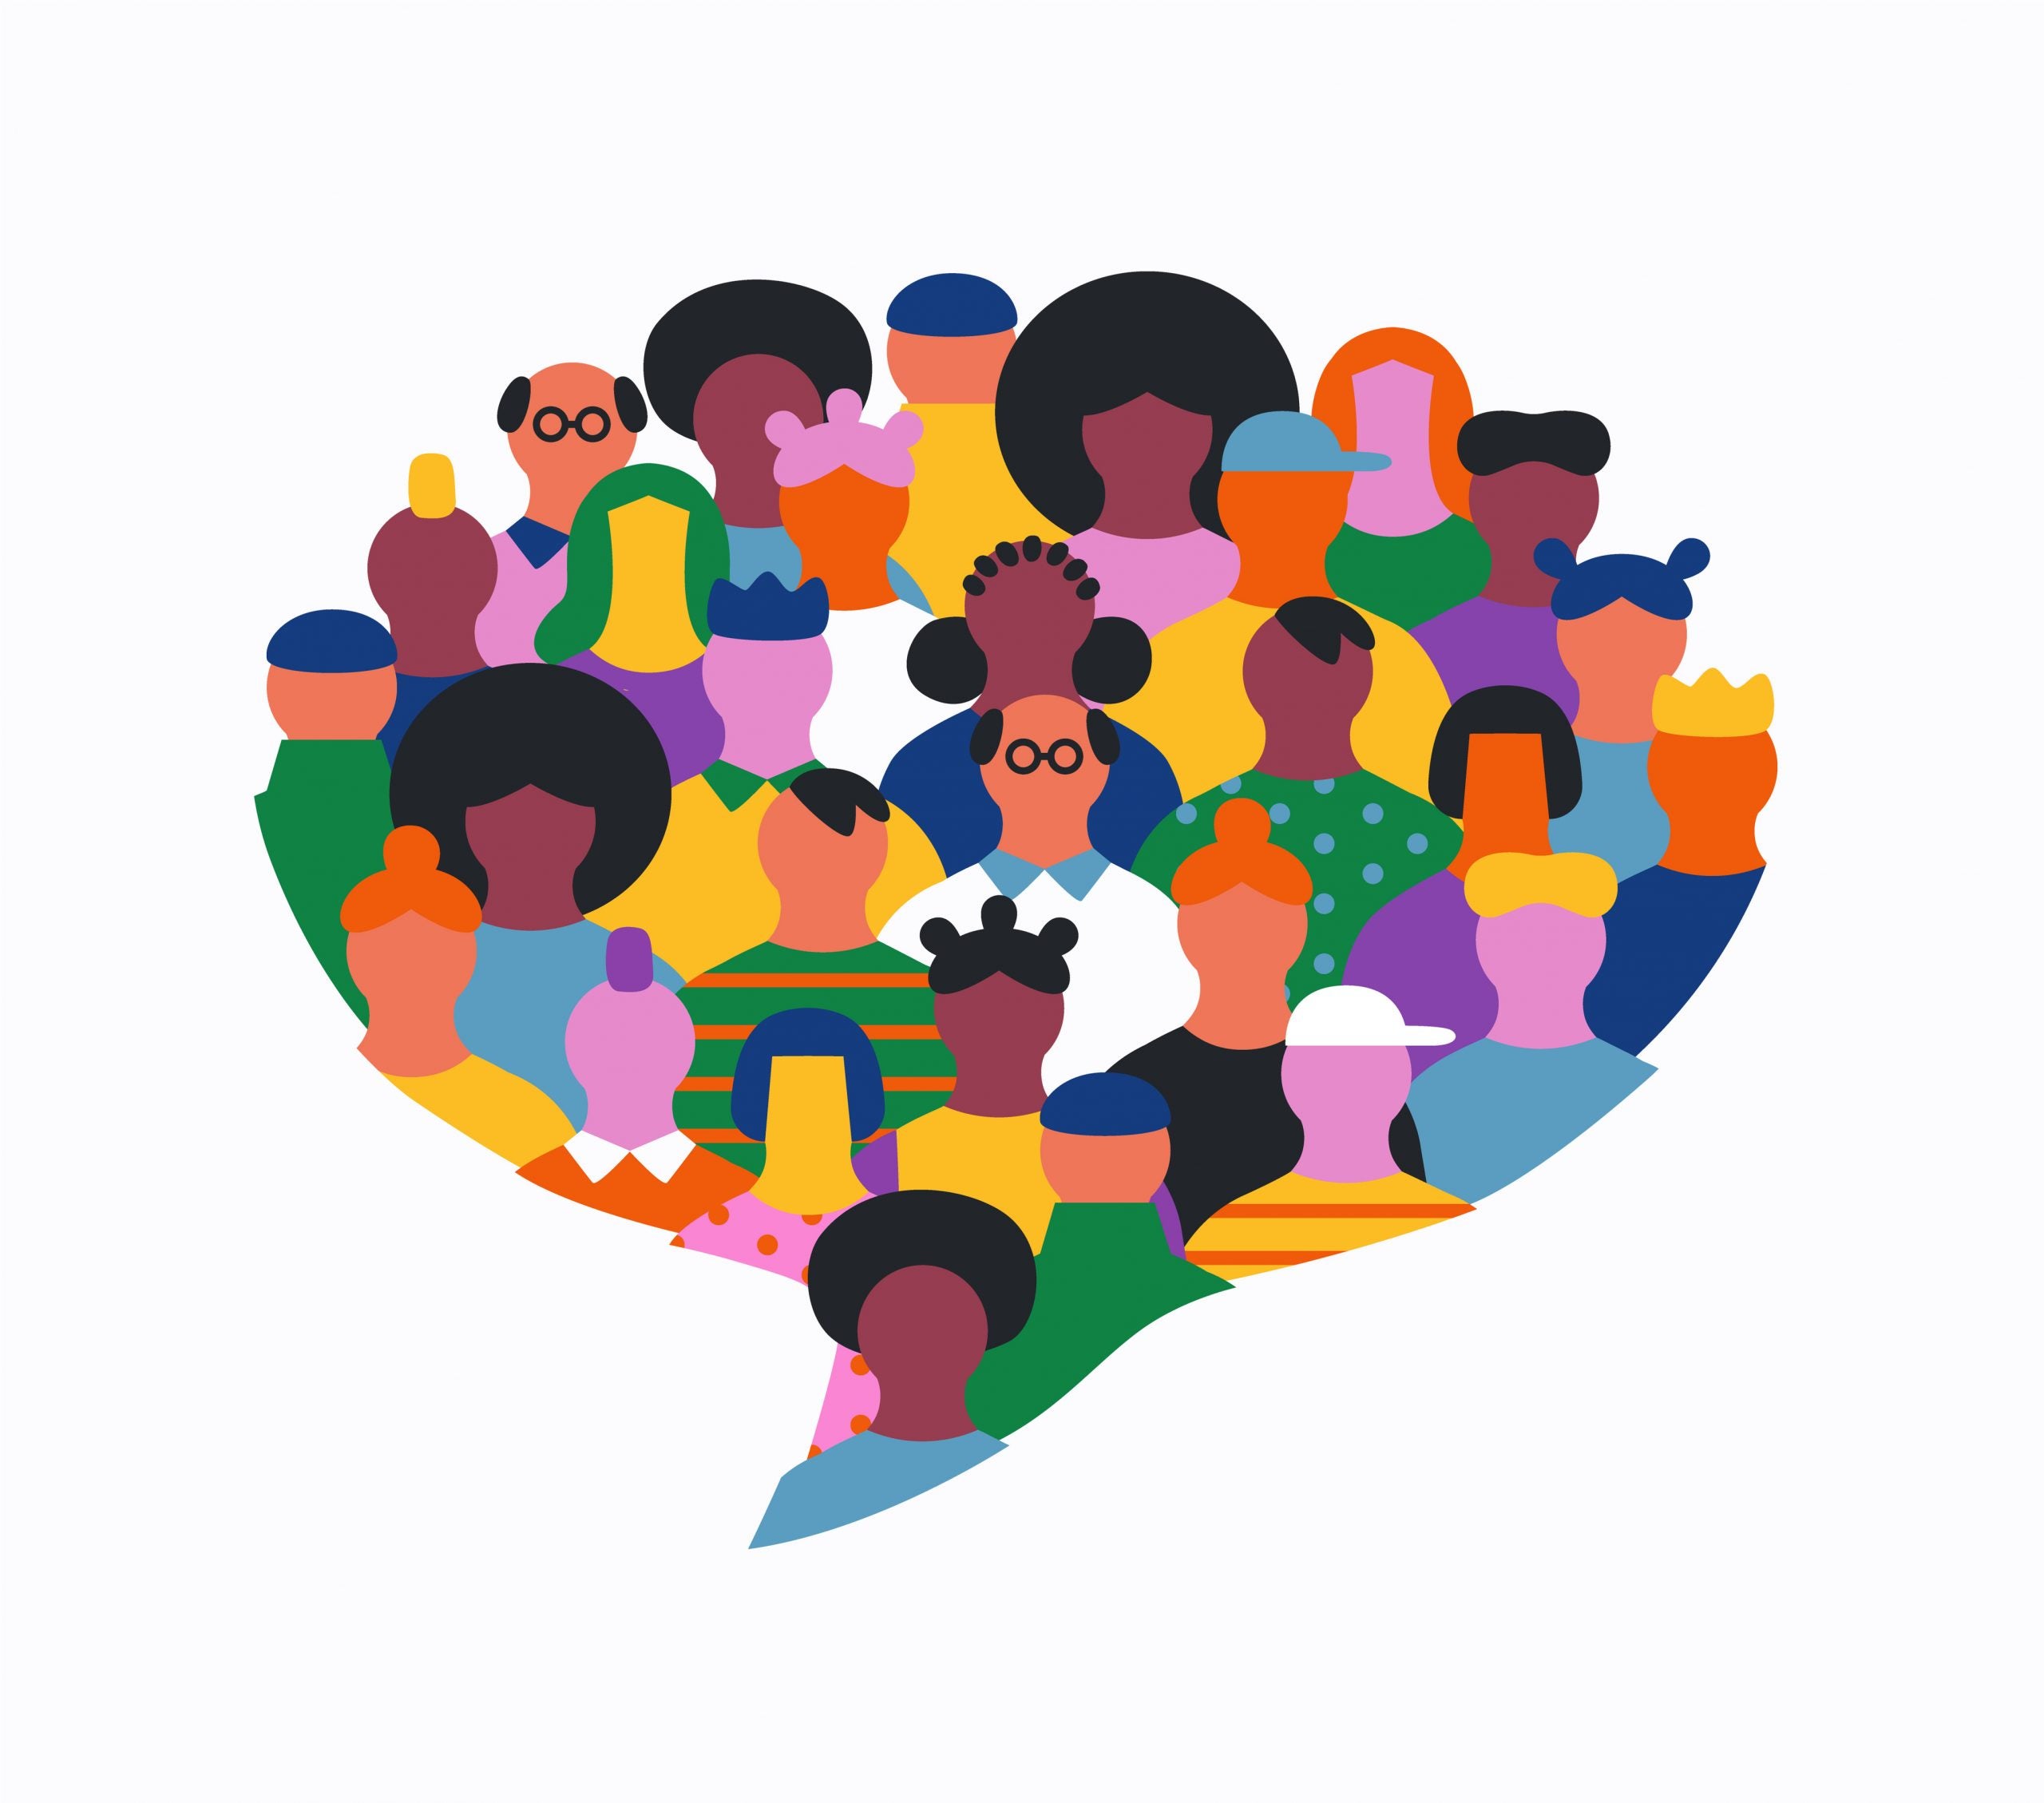 Brightly colored graphic in shape of a speech bubble contains cartoons of people from the chest up representing different races. ethnicities, and genders. The people wear brightly colored clothes and have a wide variety of hair styles.